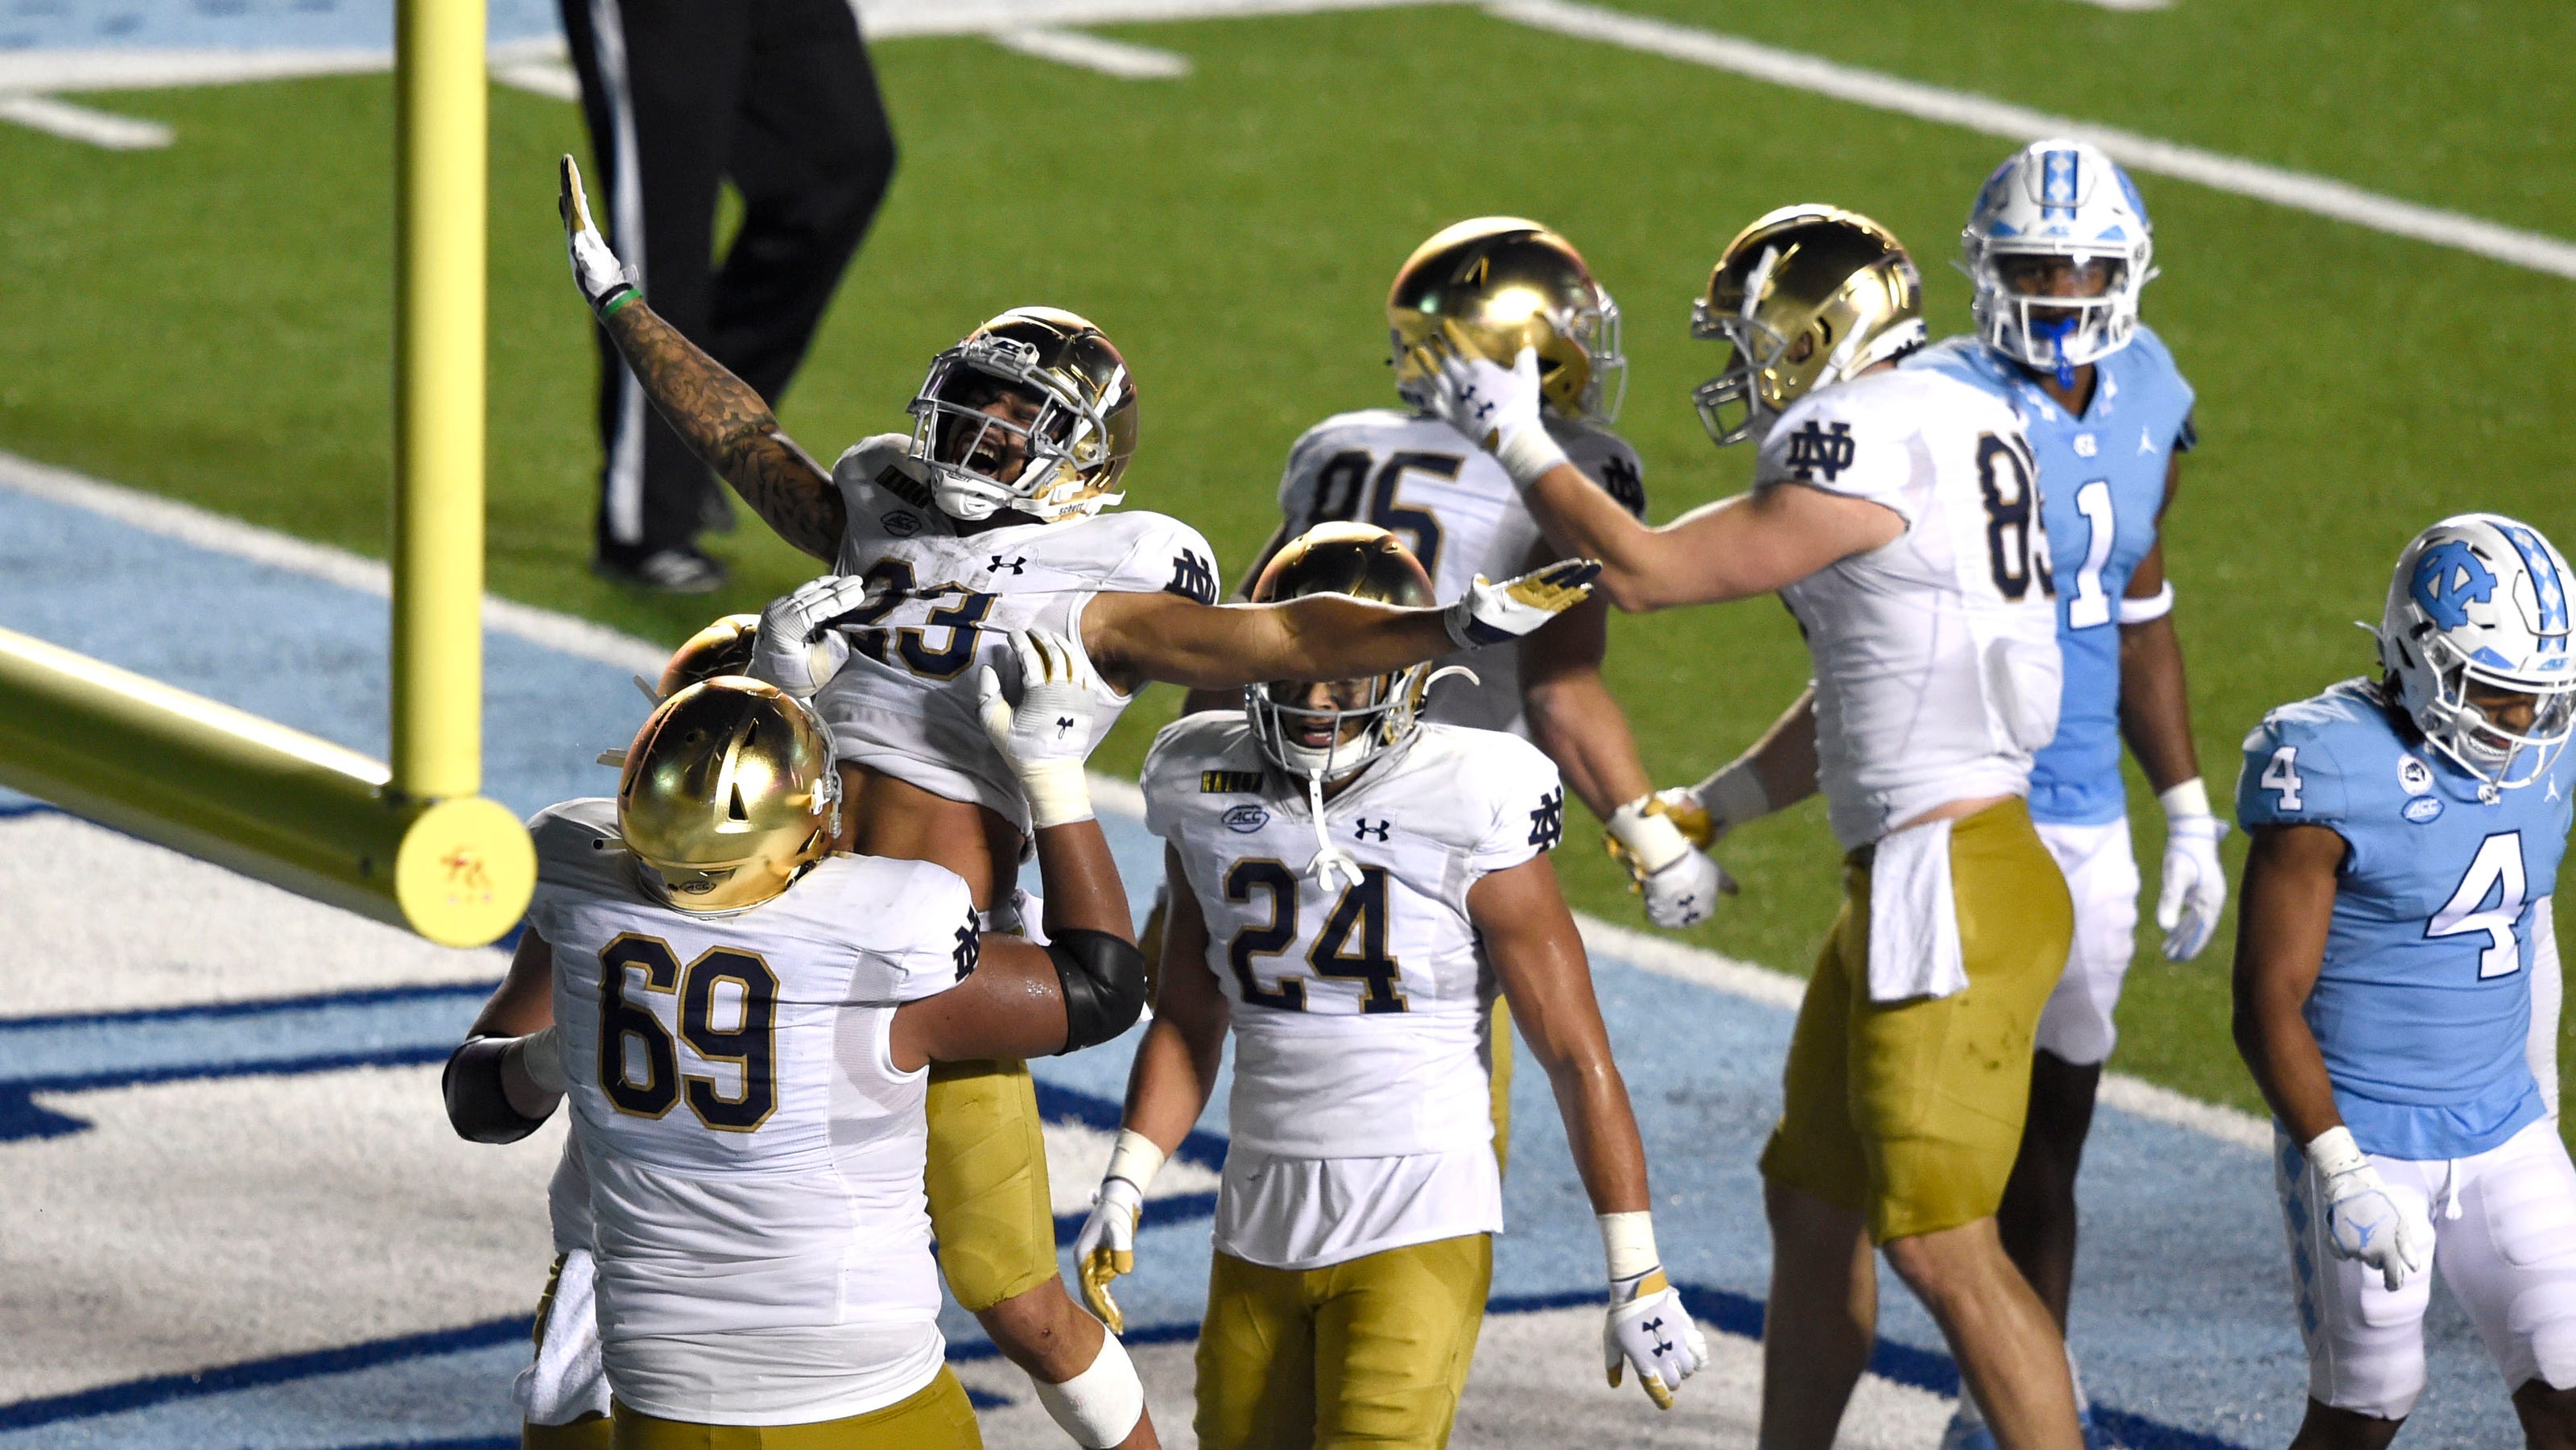 Notre Dame football might have something bigger than ACC in sights